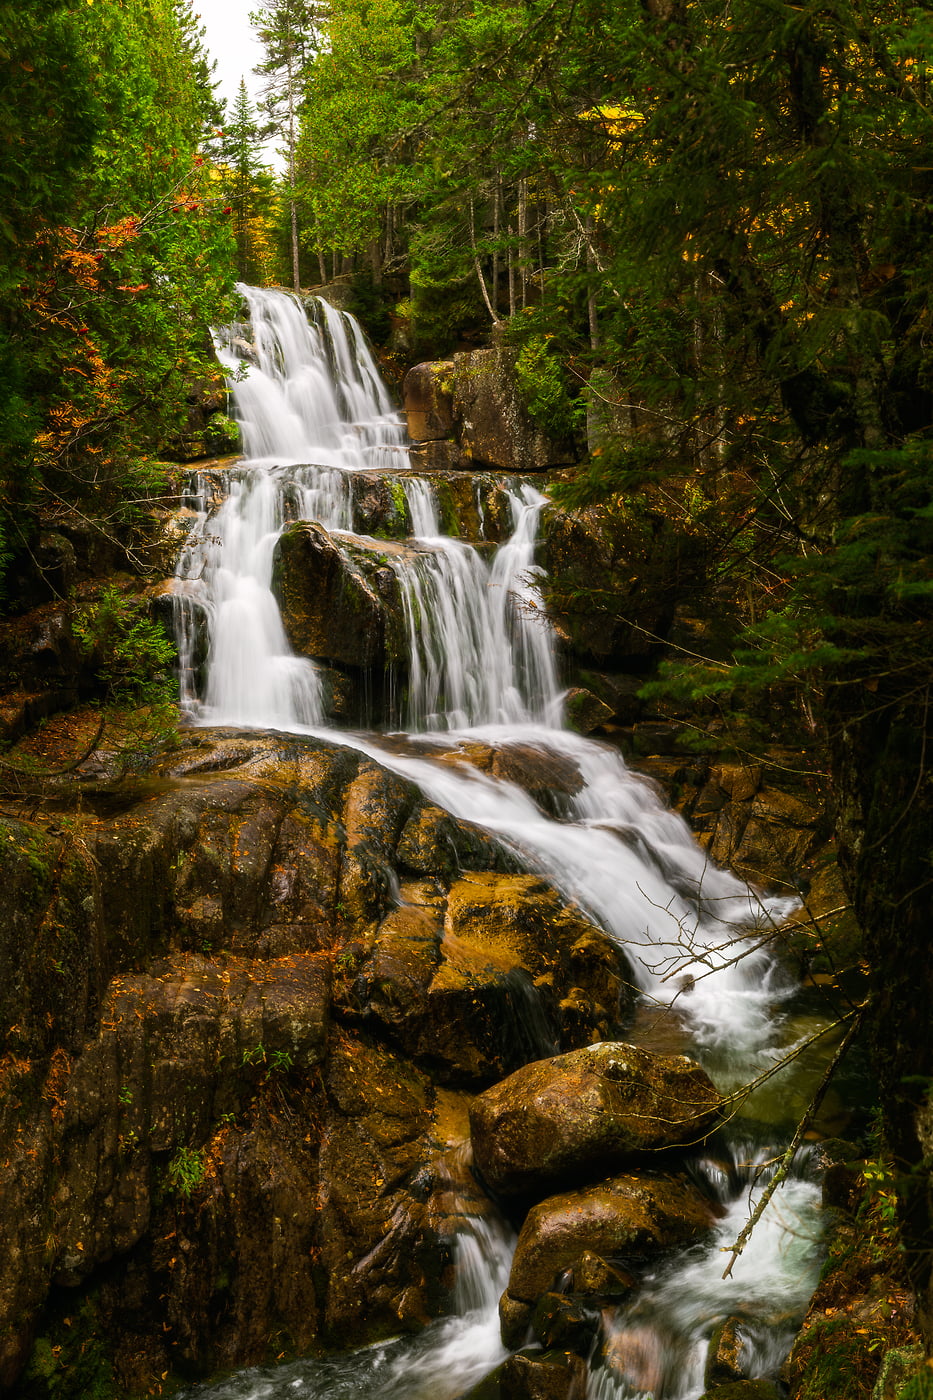 241 megapixels! A very high resolution, large-format photo of a New England waterfall with fall foliage; fine art nature photograph created by Aaron Priest at Katahdin Stream Falls on the Hunt Trail in Baxter State Park, Maine